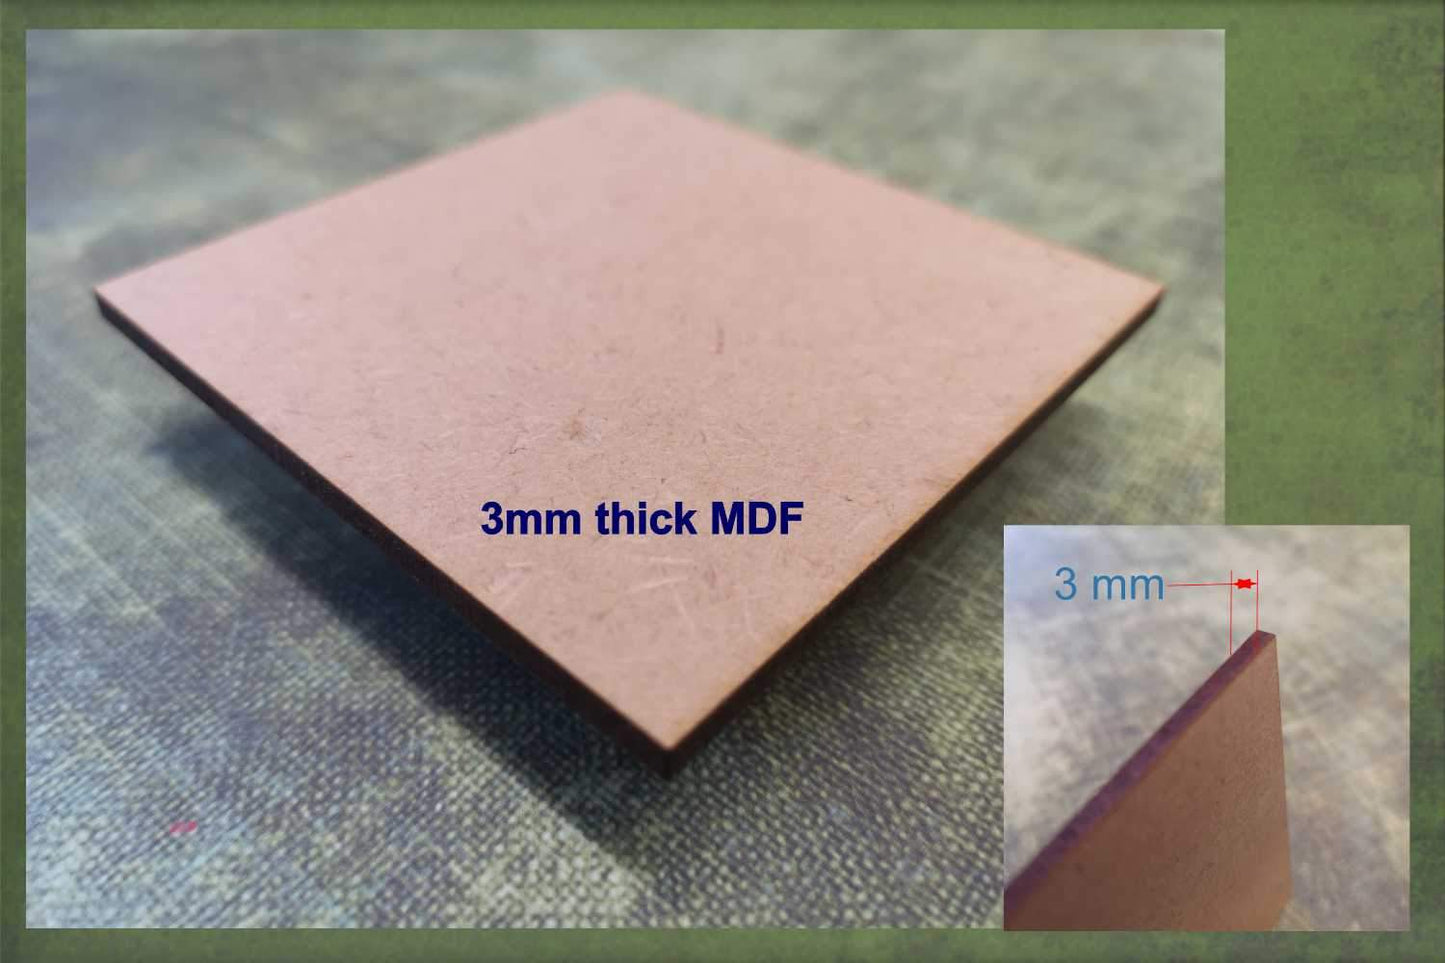 3mm thick MDF used to make the German shepherd cut-outs ready for crafting